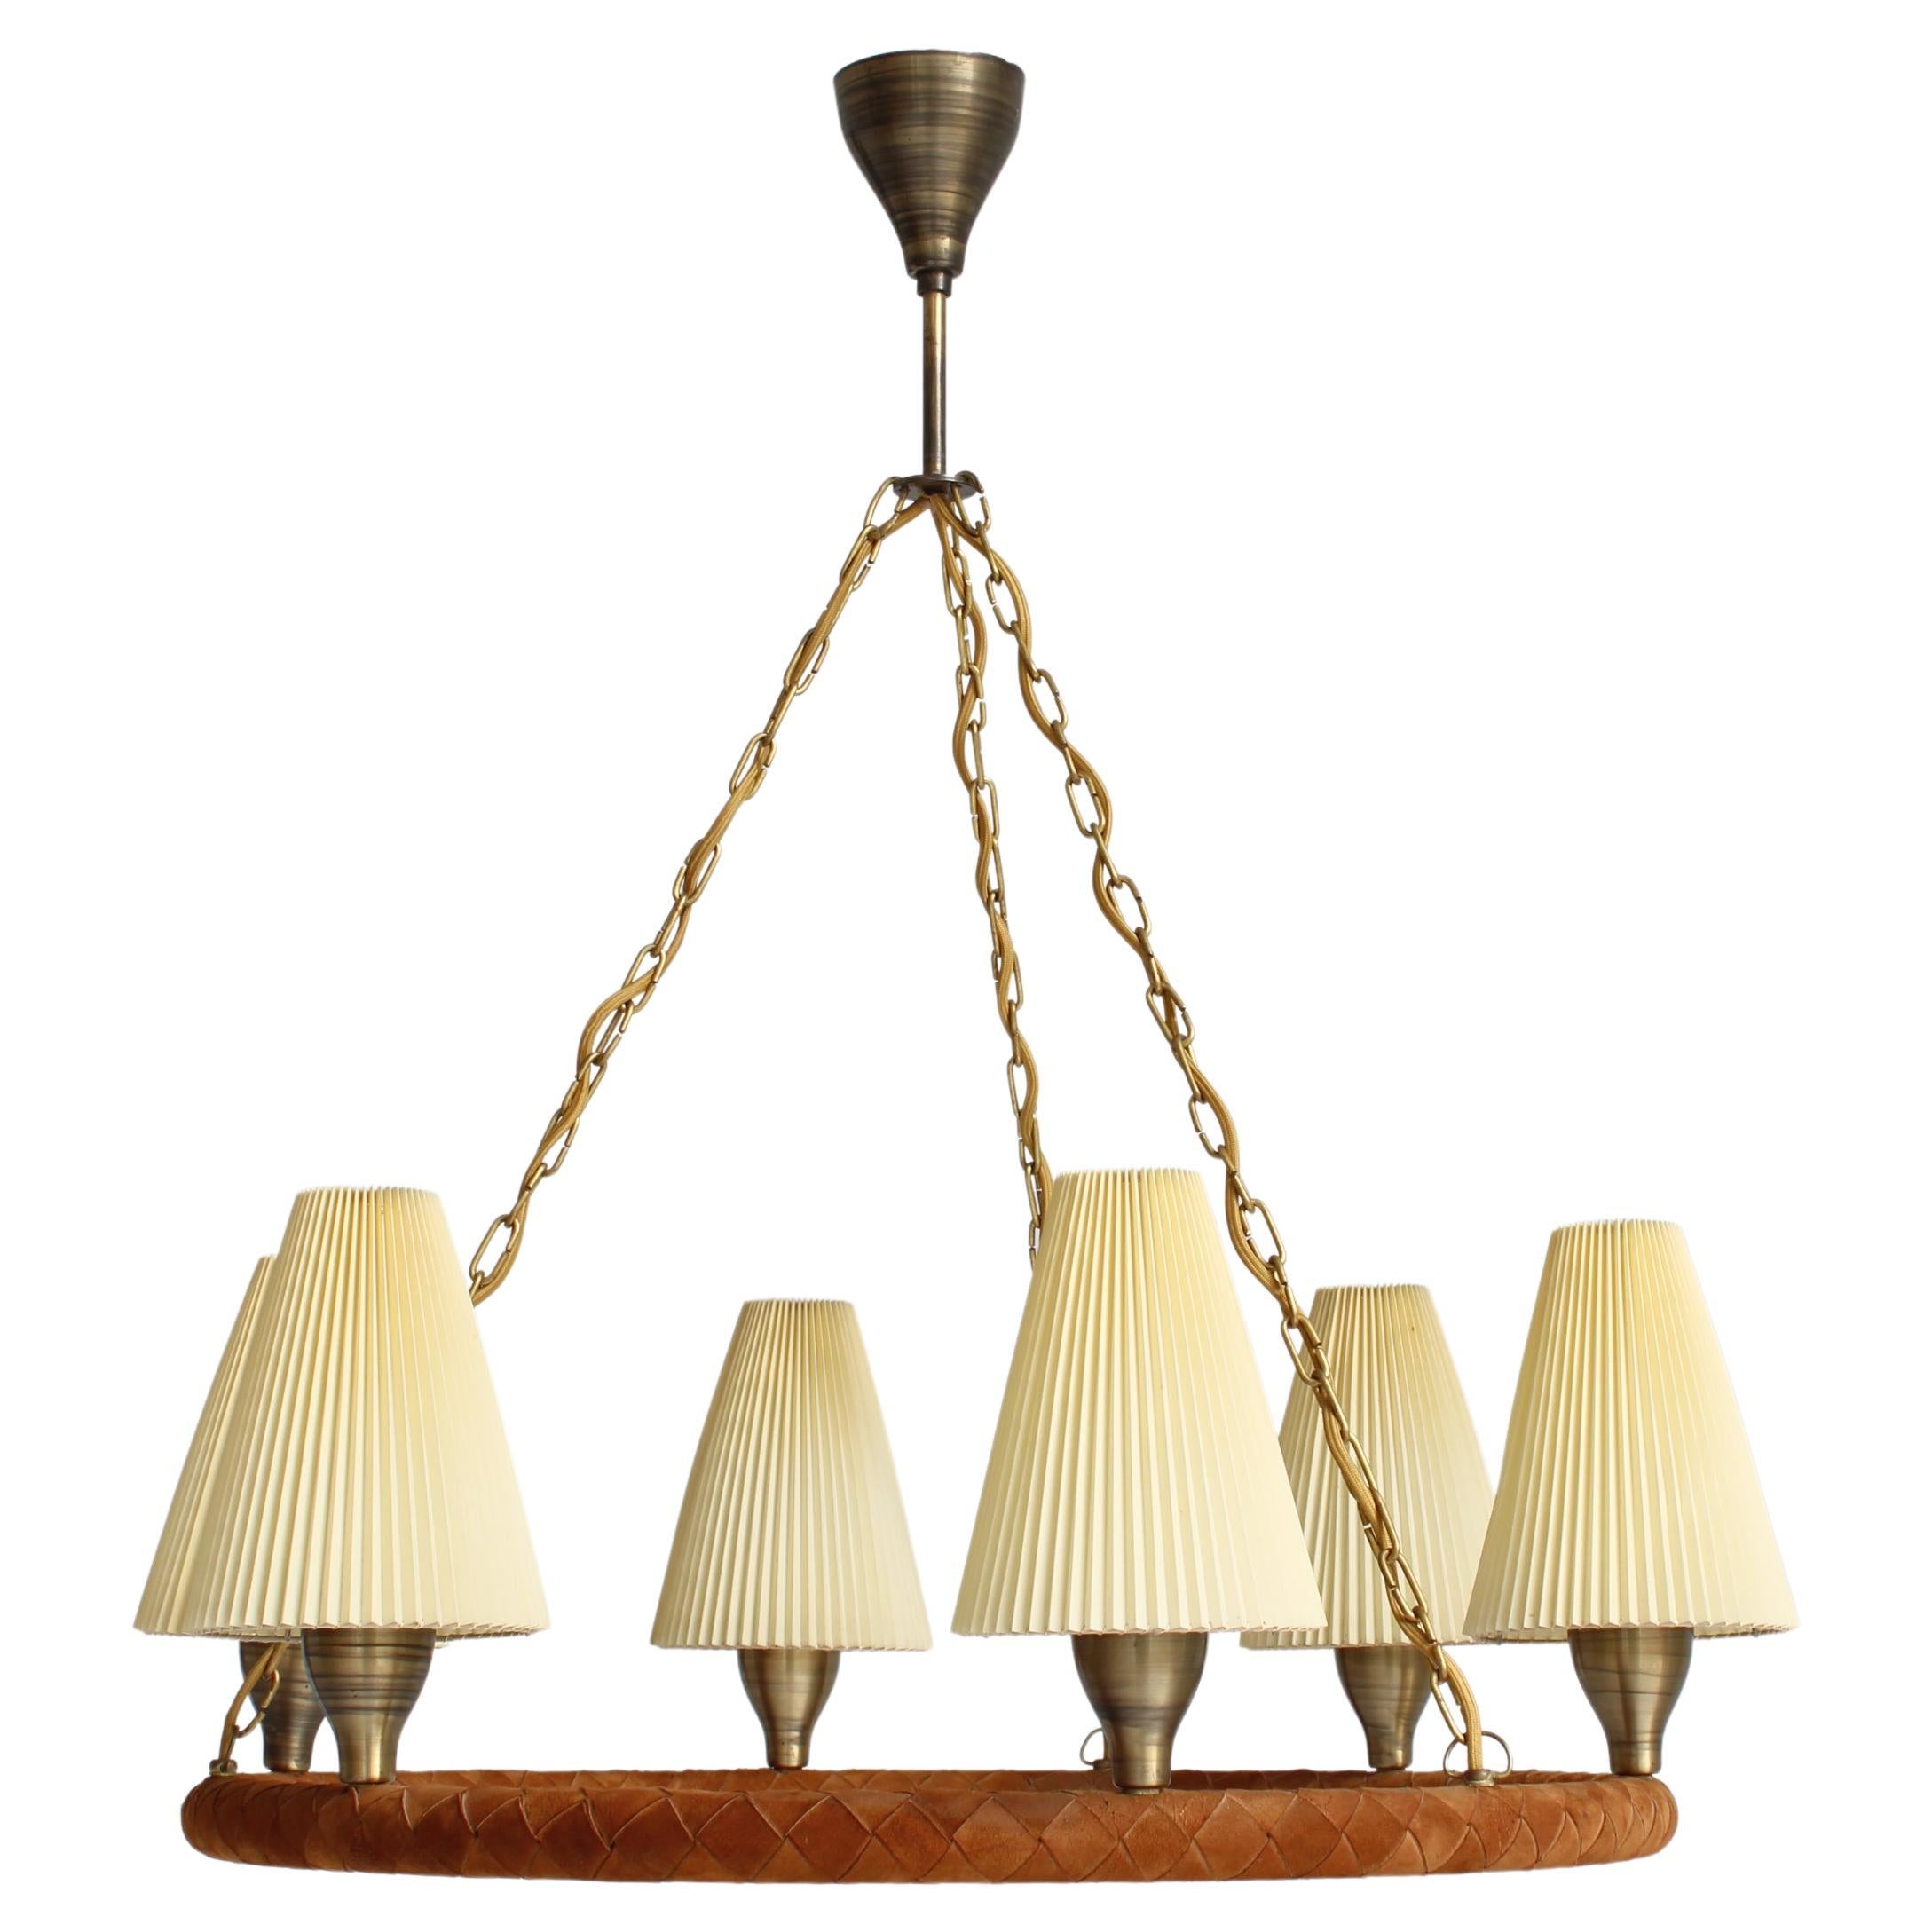 Danish Modern Chandelier in Leather, Brass and Glass by LYFA, Denmark, 1940s For Sale